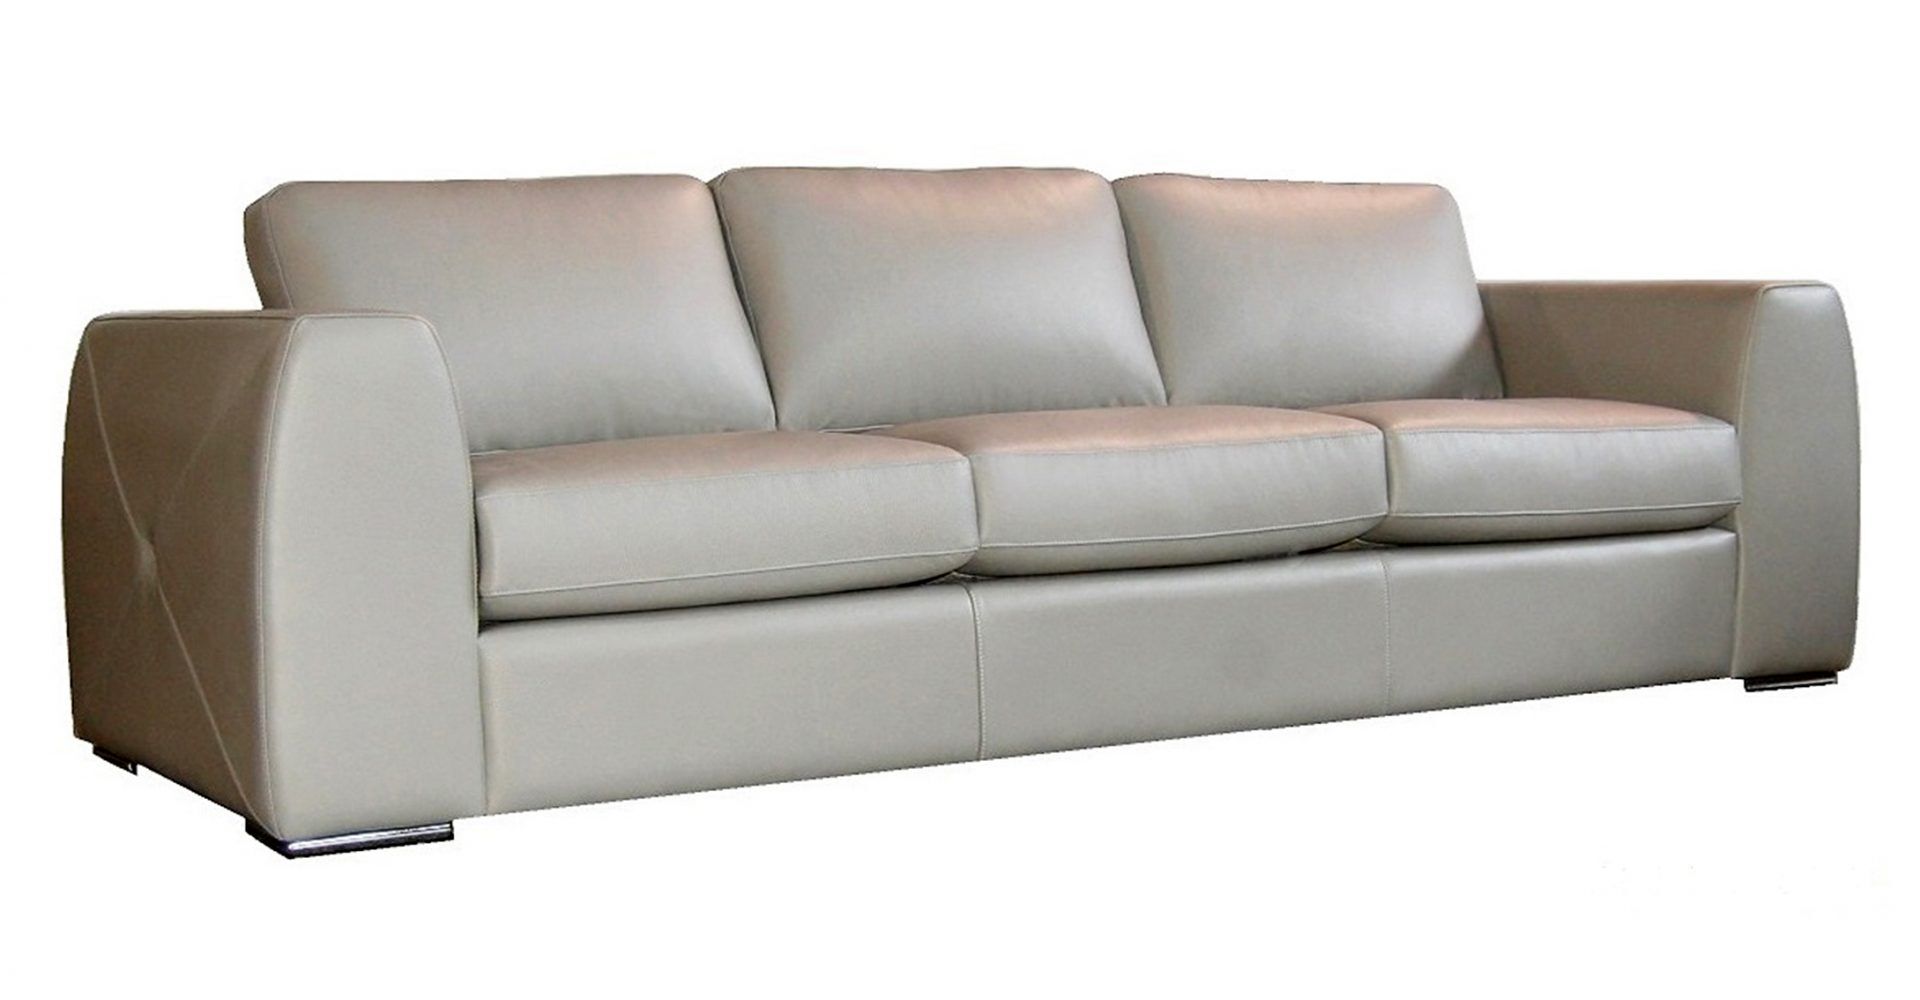 aston leather sofa bed reviews